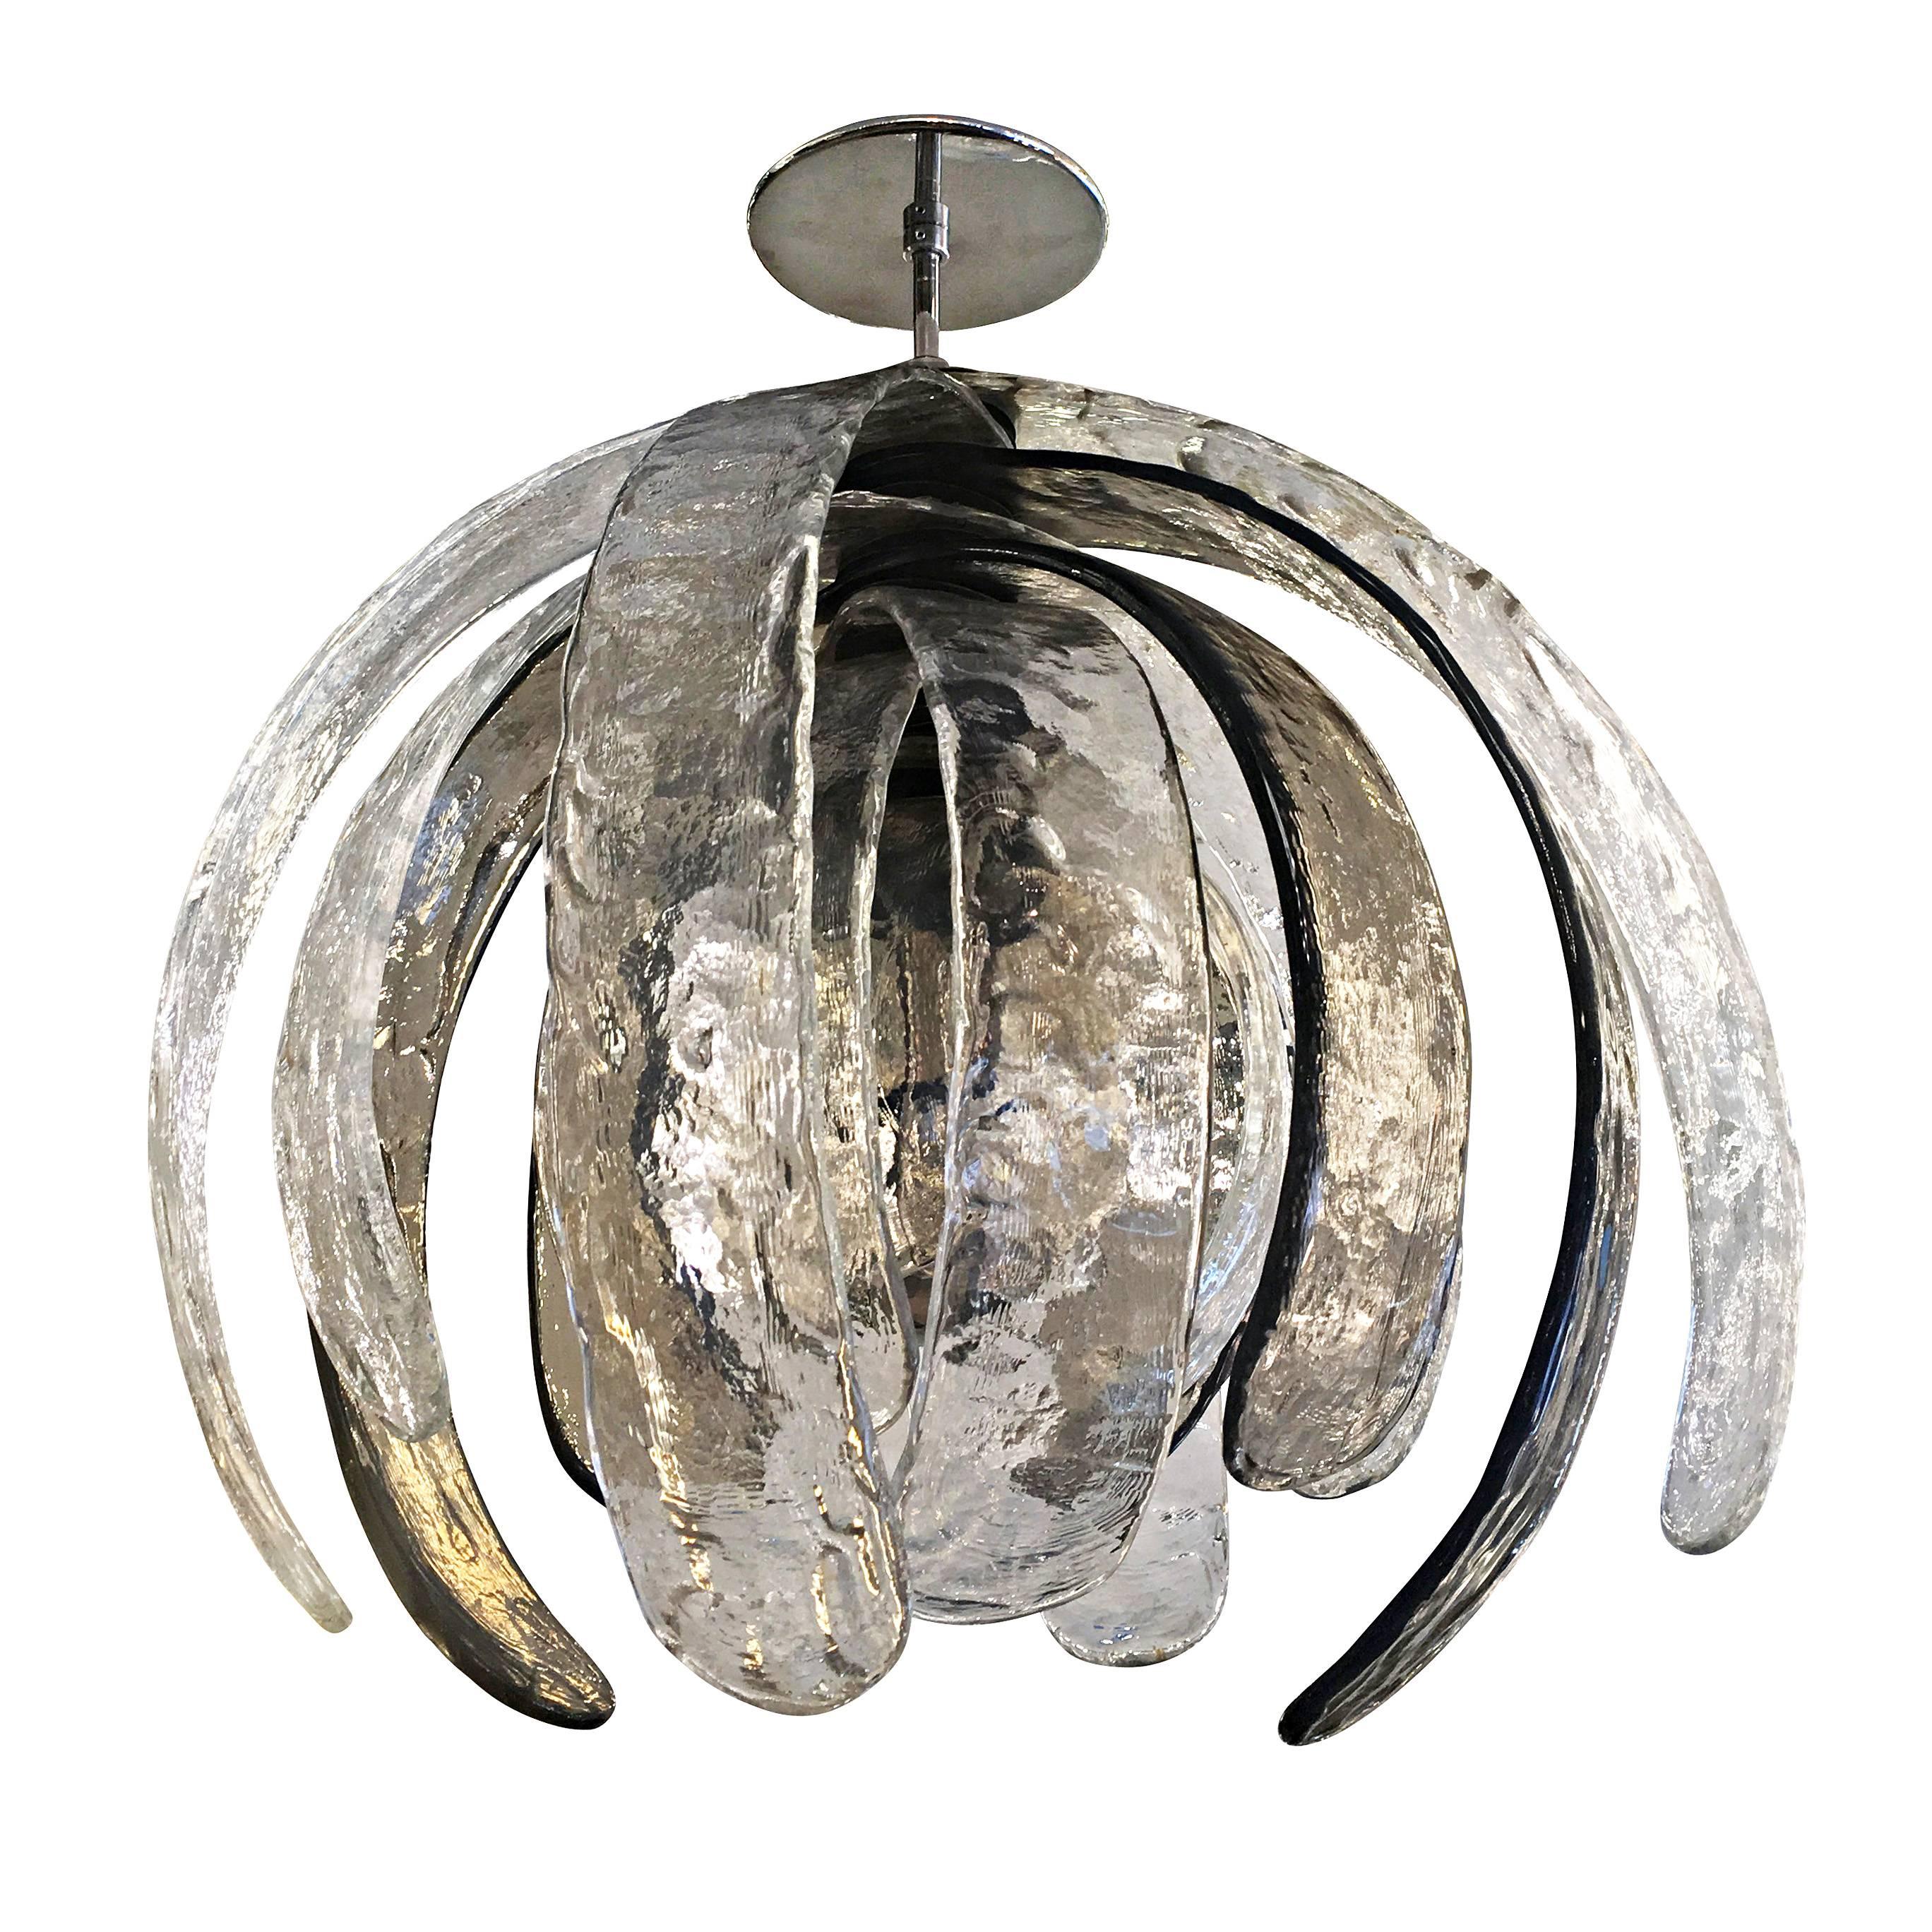 Sculptural Murano glass chandelier designed by Carlo Nason for Mazzega in the 1960s. It’s composed of eleven textured petal shaped glasses that can rotate around the center stem. Four of the glasses are a dark gray and seven are clear. Holds one